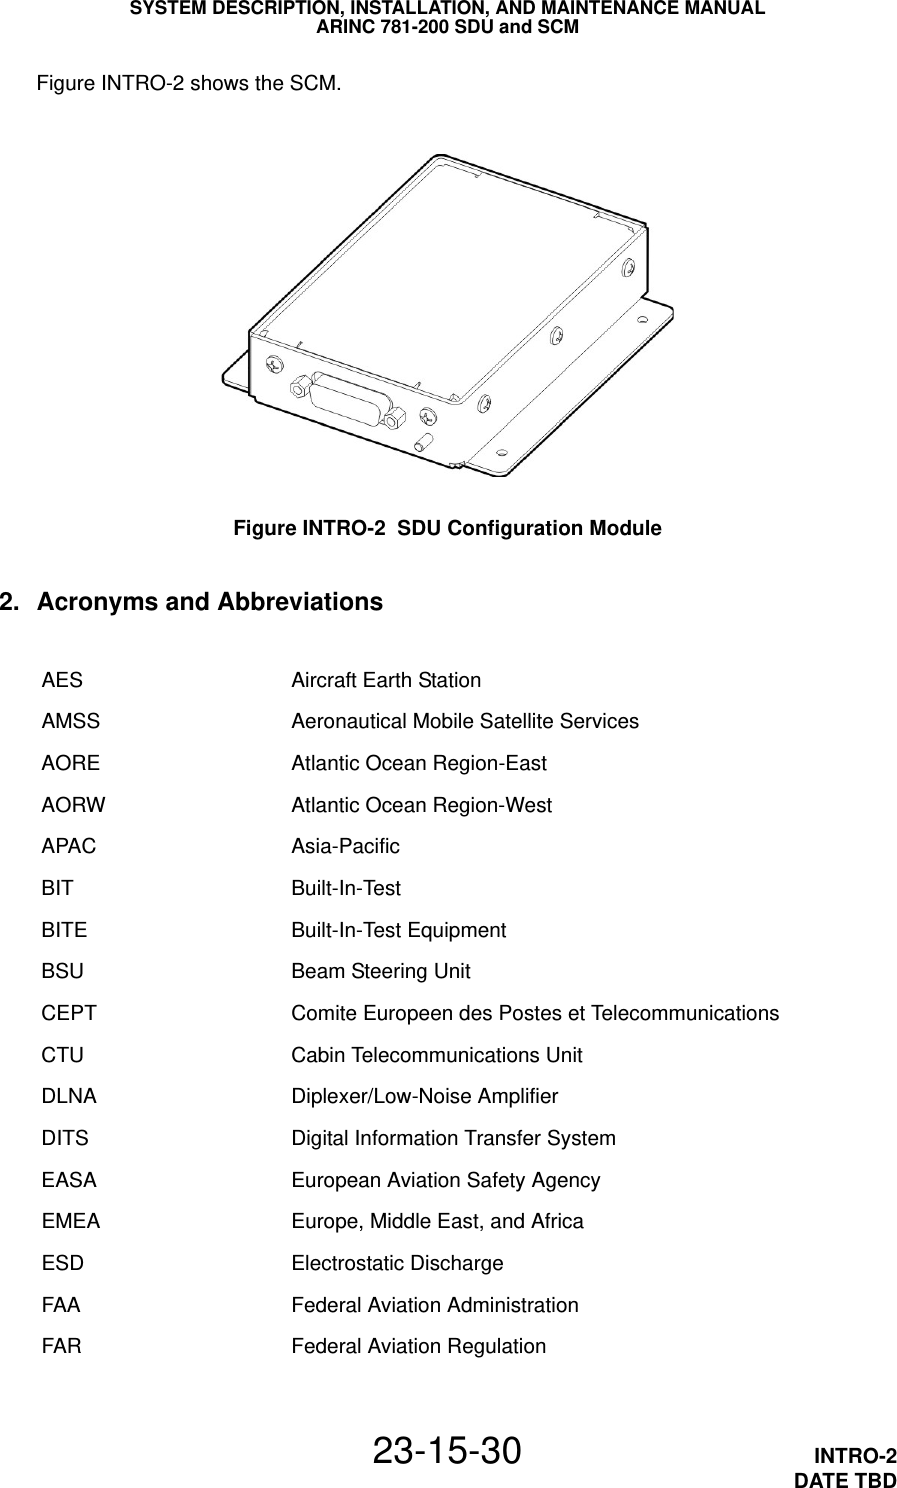 SYSTEM DESCRIPTION, INSTALLATION, AND MAINTENANCE MANUALARINC 781-200 SDU and SCM23-15-30 INTRO-2DATE TBDFigure INTRO-2 shows the SCM.Figure INTRO-2  SDU Configuration Module2. Acronyms and AbbreviationsAES Aircraft Earth StationAMSS Aeronautical Mobile Satellite ServicesAORE Atlantic Ocean Region-EastAORW Atlantic Ocean Region-WestAPAC Asia-PacificBIT Built-In-TestBITE Built-In-Test EquipmentBSU Beam Steering UnitCEPT Comite Europeen des Postes et TelecommunicationsCTU Cabin Telecommunications UnitDLNA Diplexer/Low-Noise AmplifierDITS Digital Information Transfer SystemEASA European Aviation Safety AgencyEMEA Europe, Middle East, and AfricaESD Electrostatic DischargeFAA Federal Aviation AdministrationFAR Federal Aviation Regulation